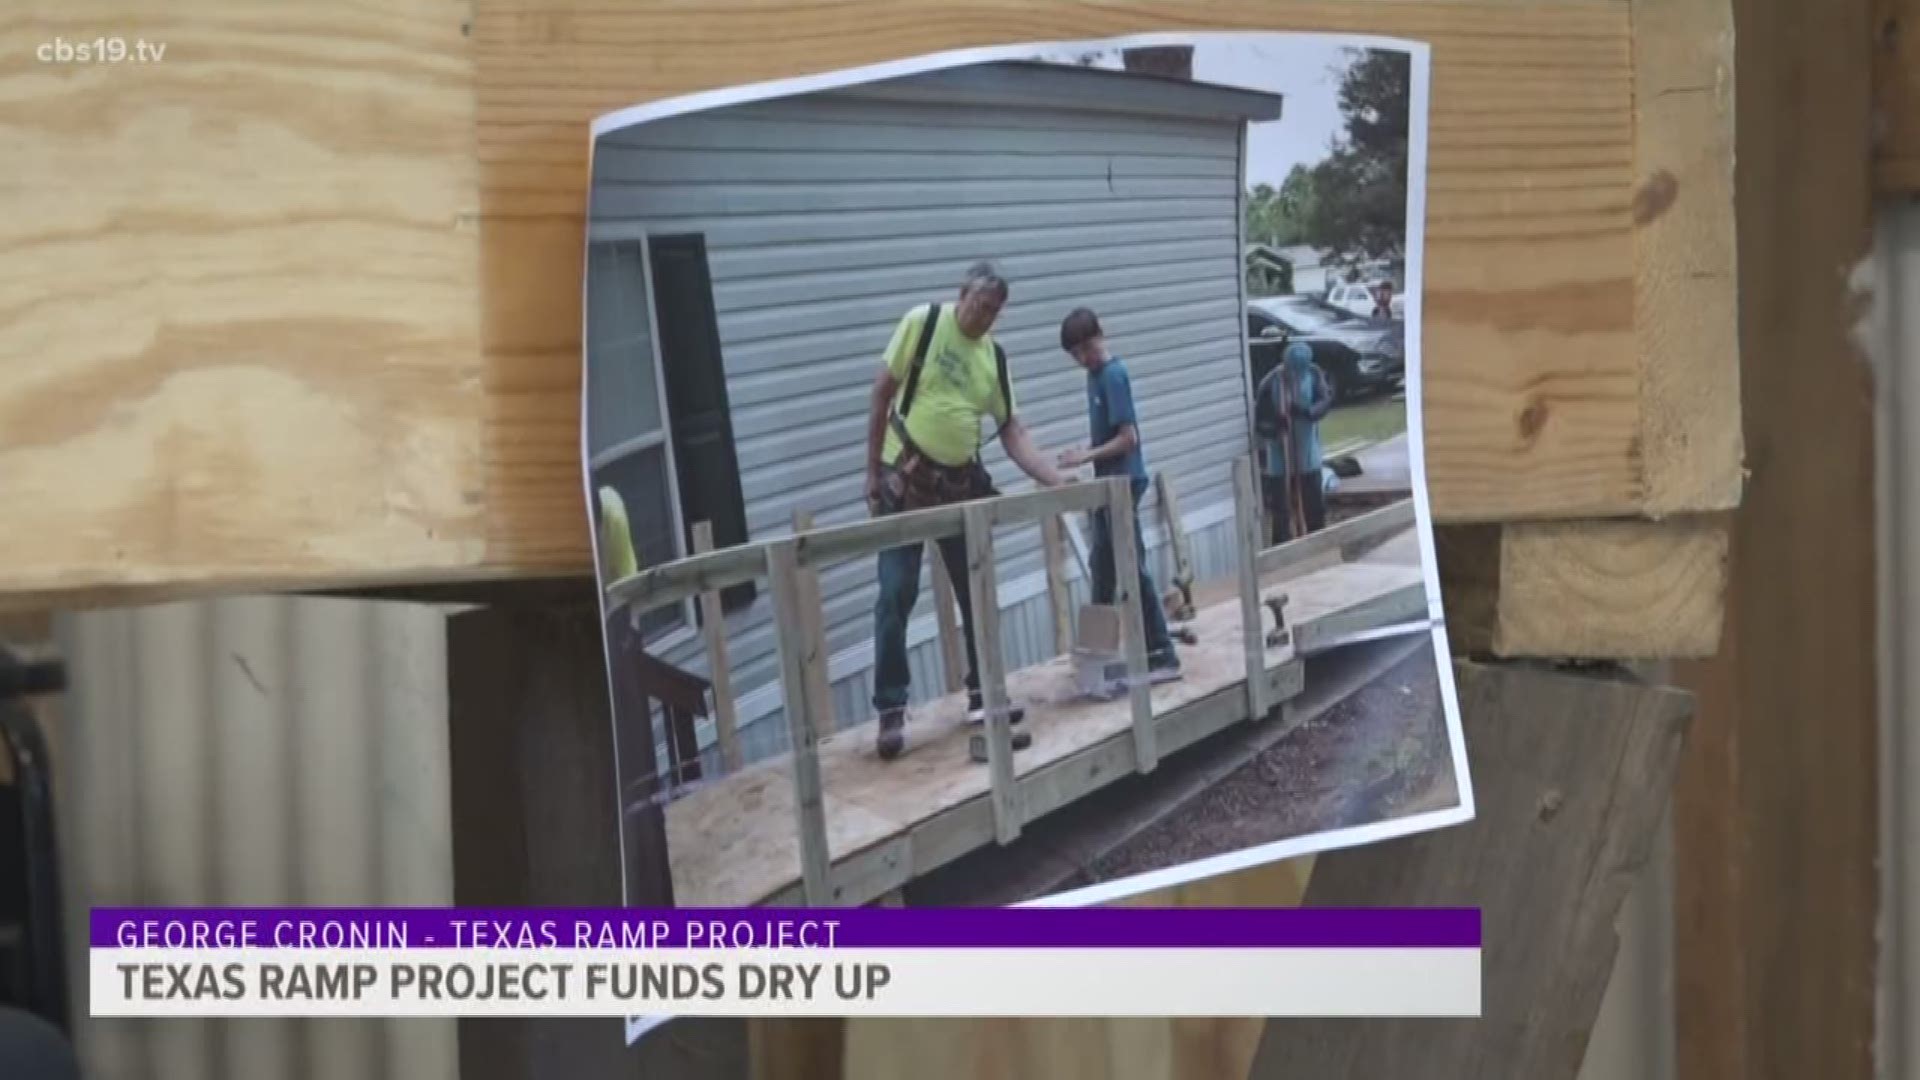 Texas Ramp Project funds dry up